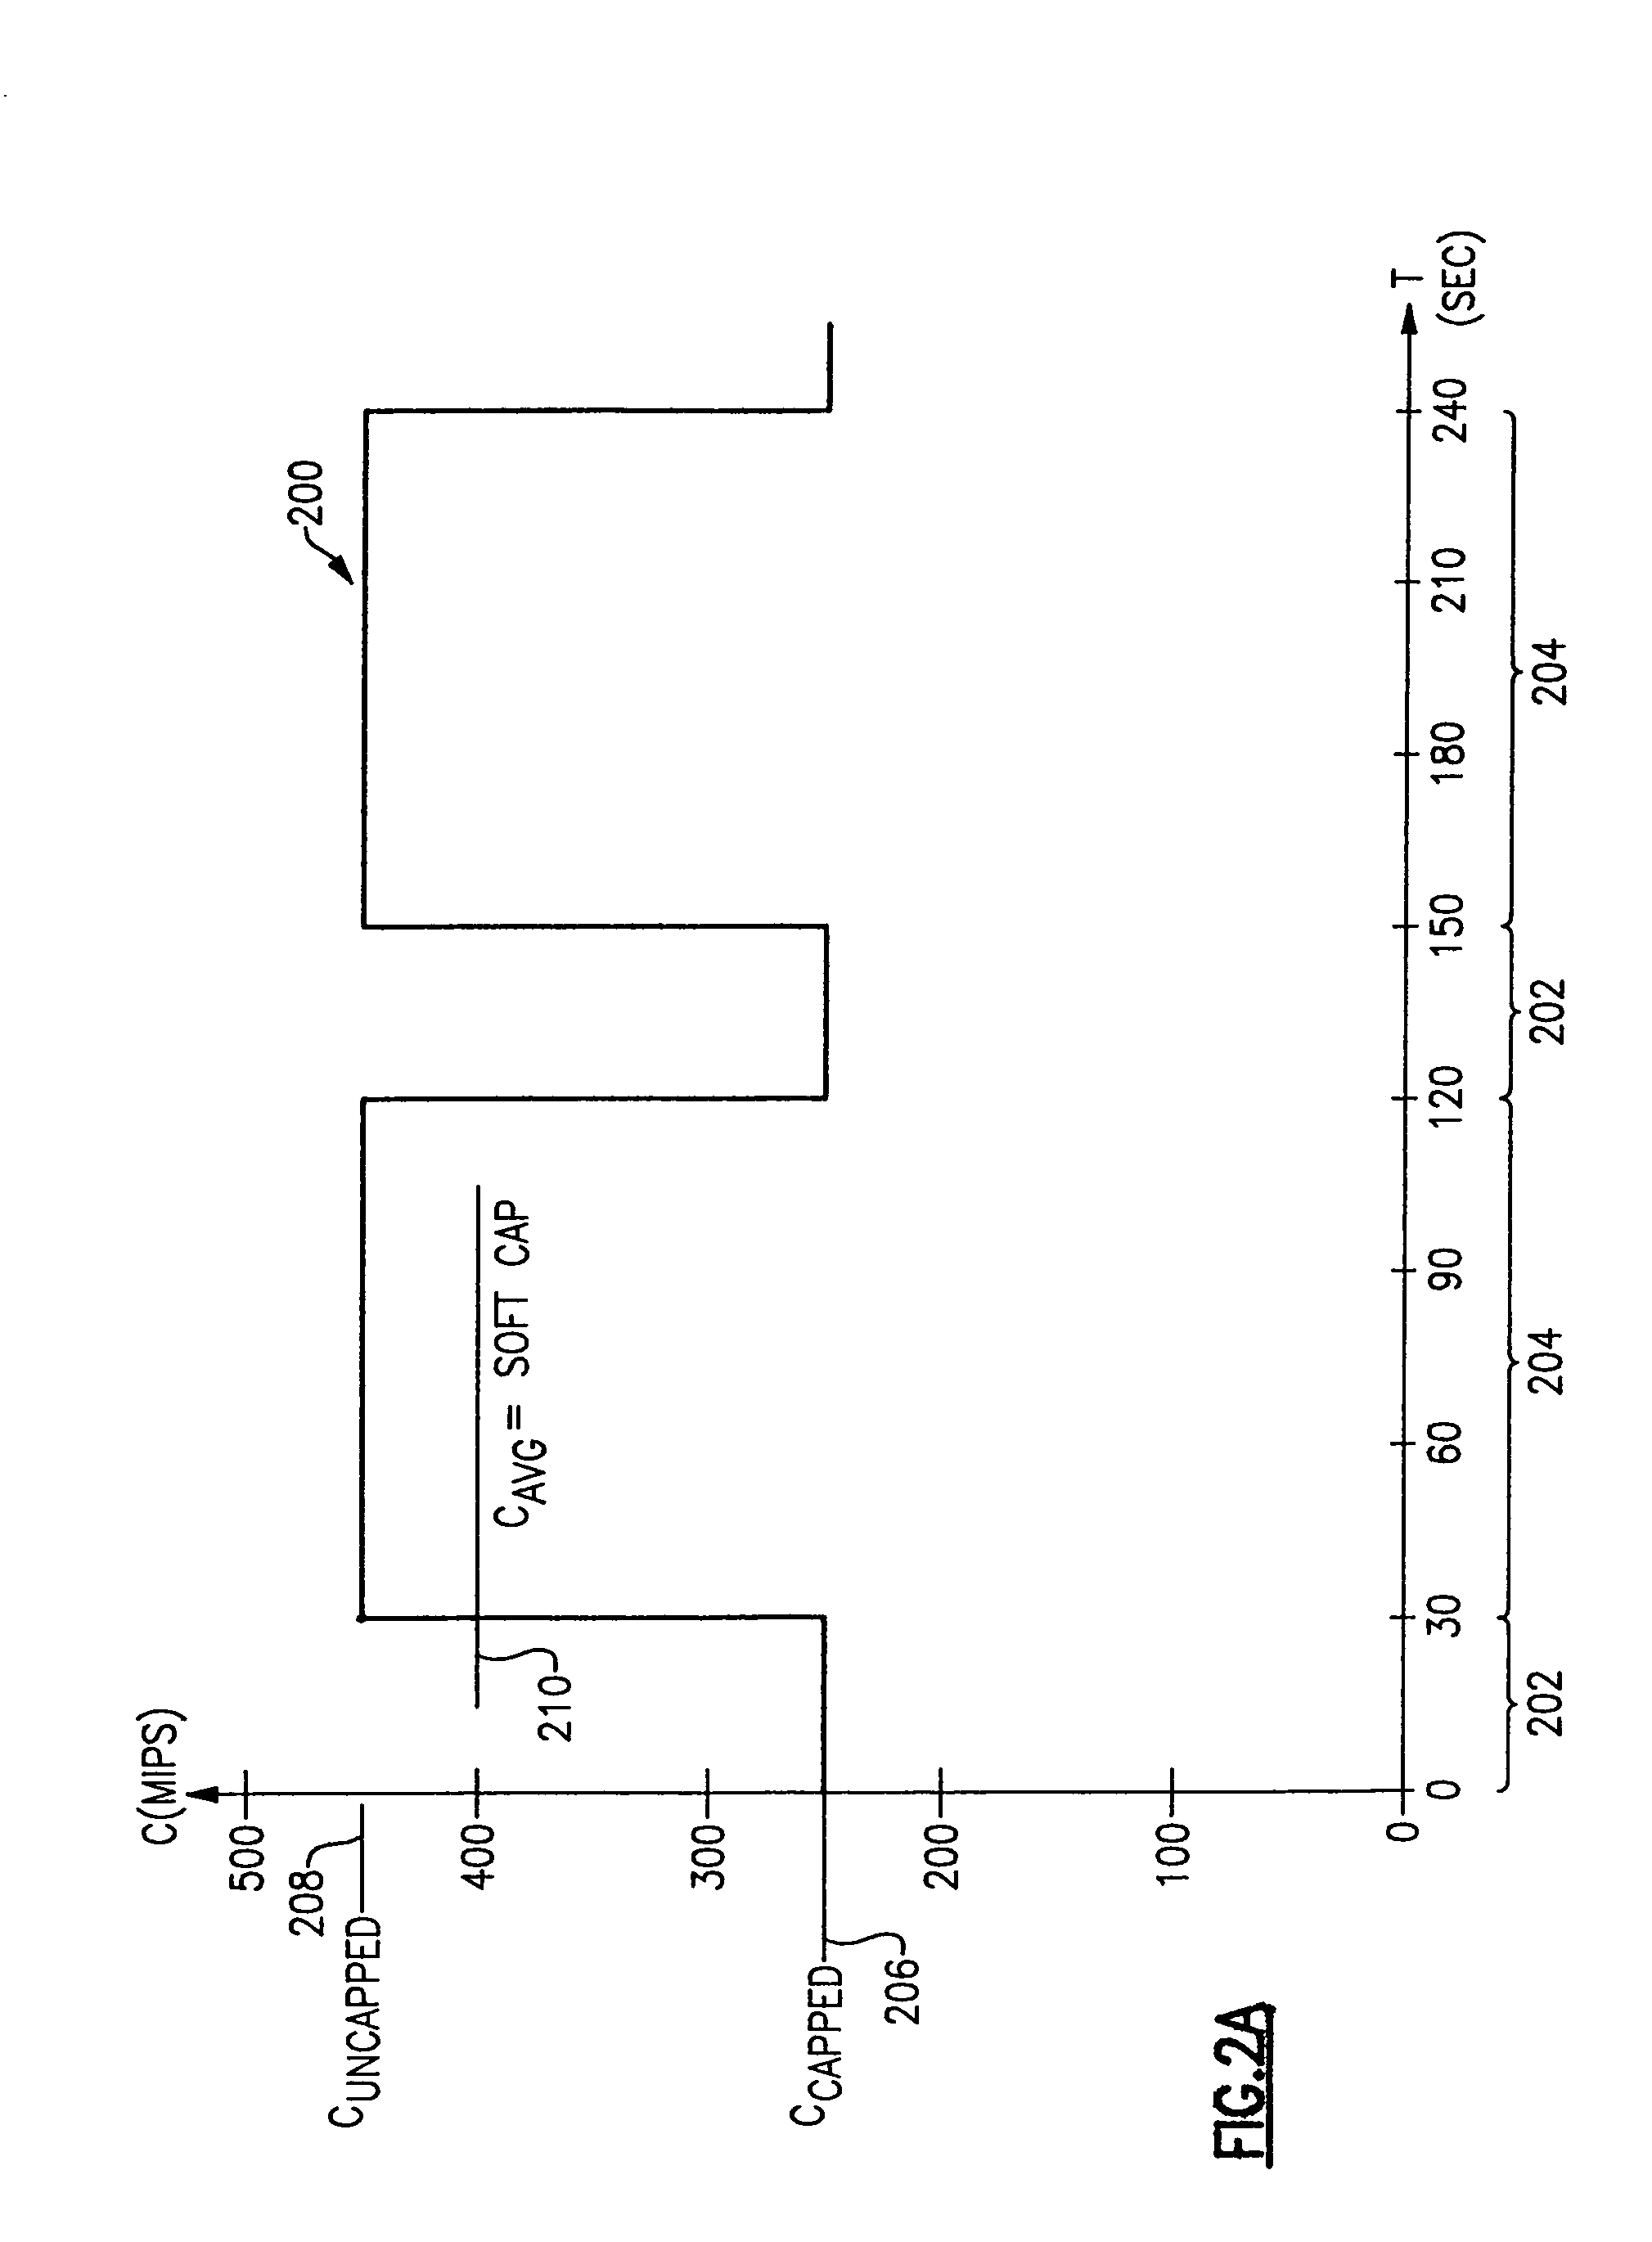 Method and apparatus for enforcing capacity limitations in a logically partitioned system